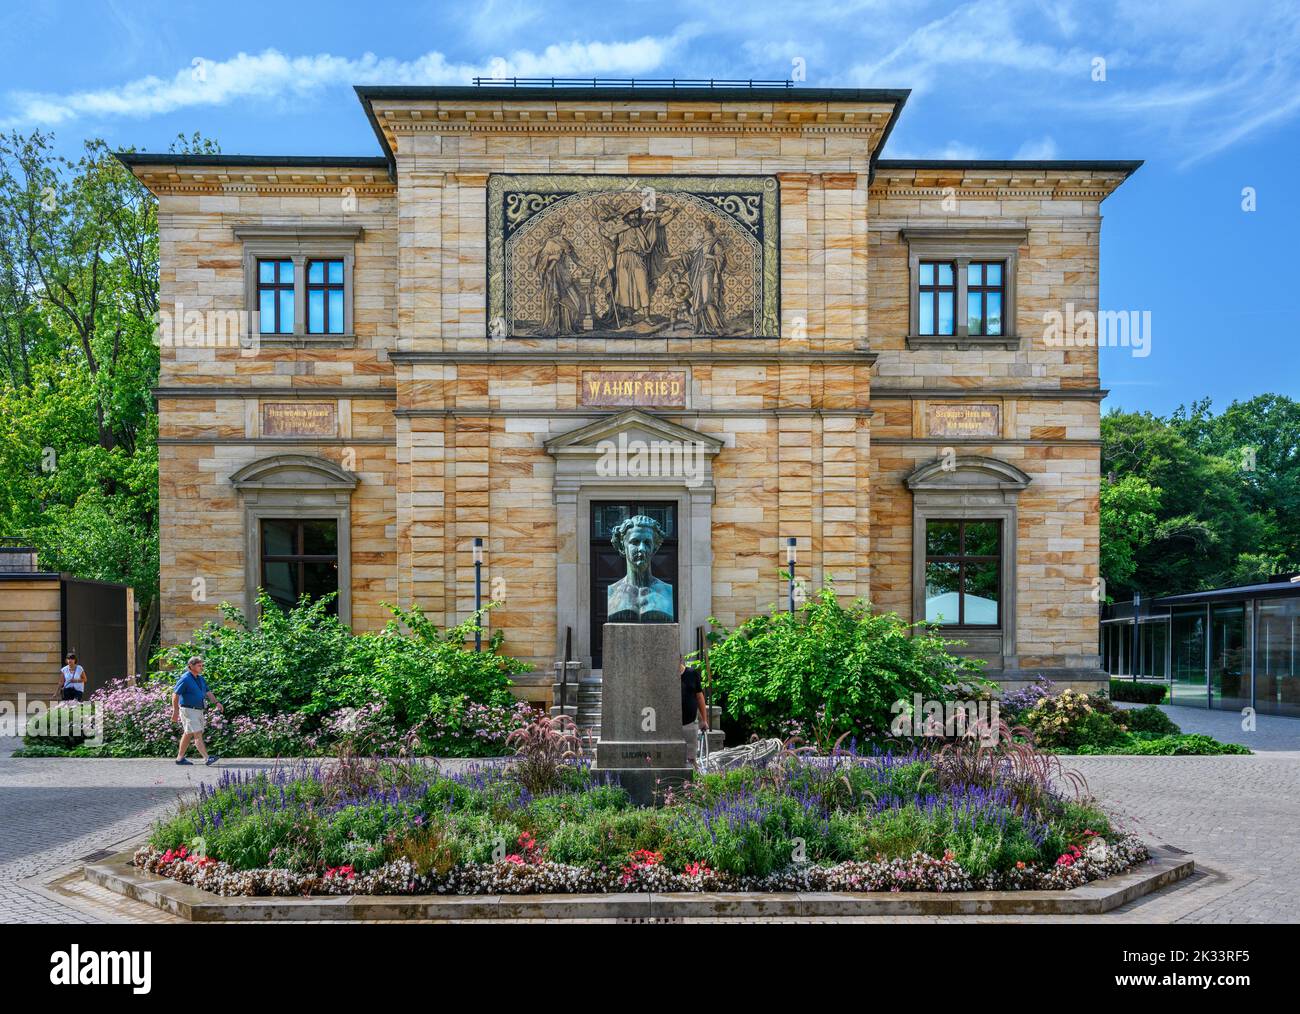 Wahnfried, Richard Wagner's villa and part of the Richard Wagner Museum, Bayreuth, Bavaria, Germany Stock Photo